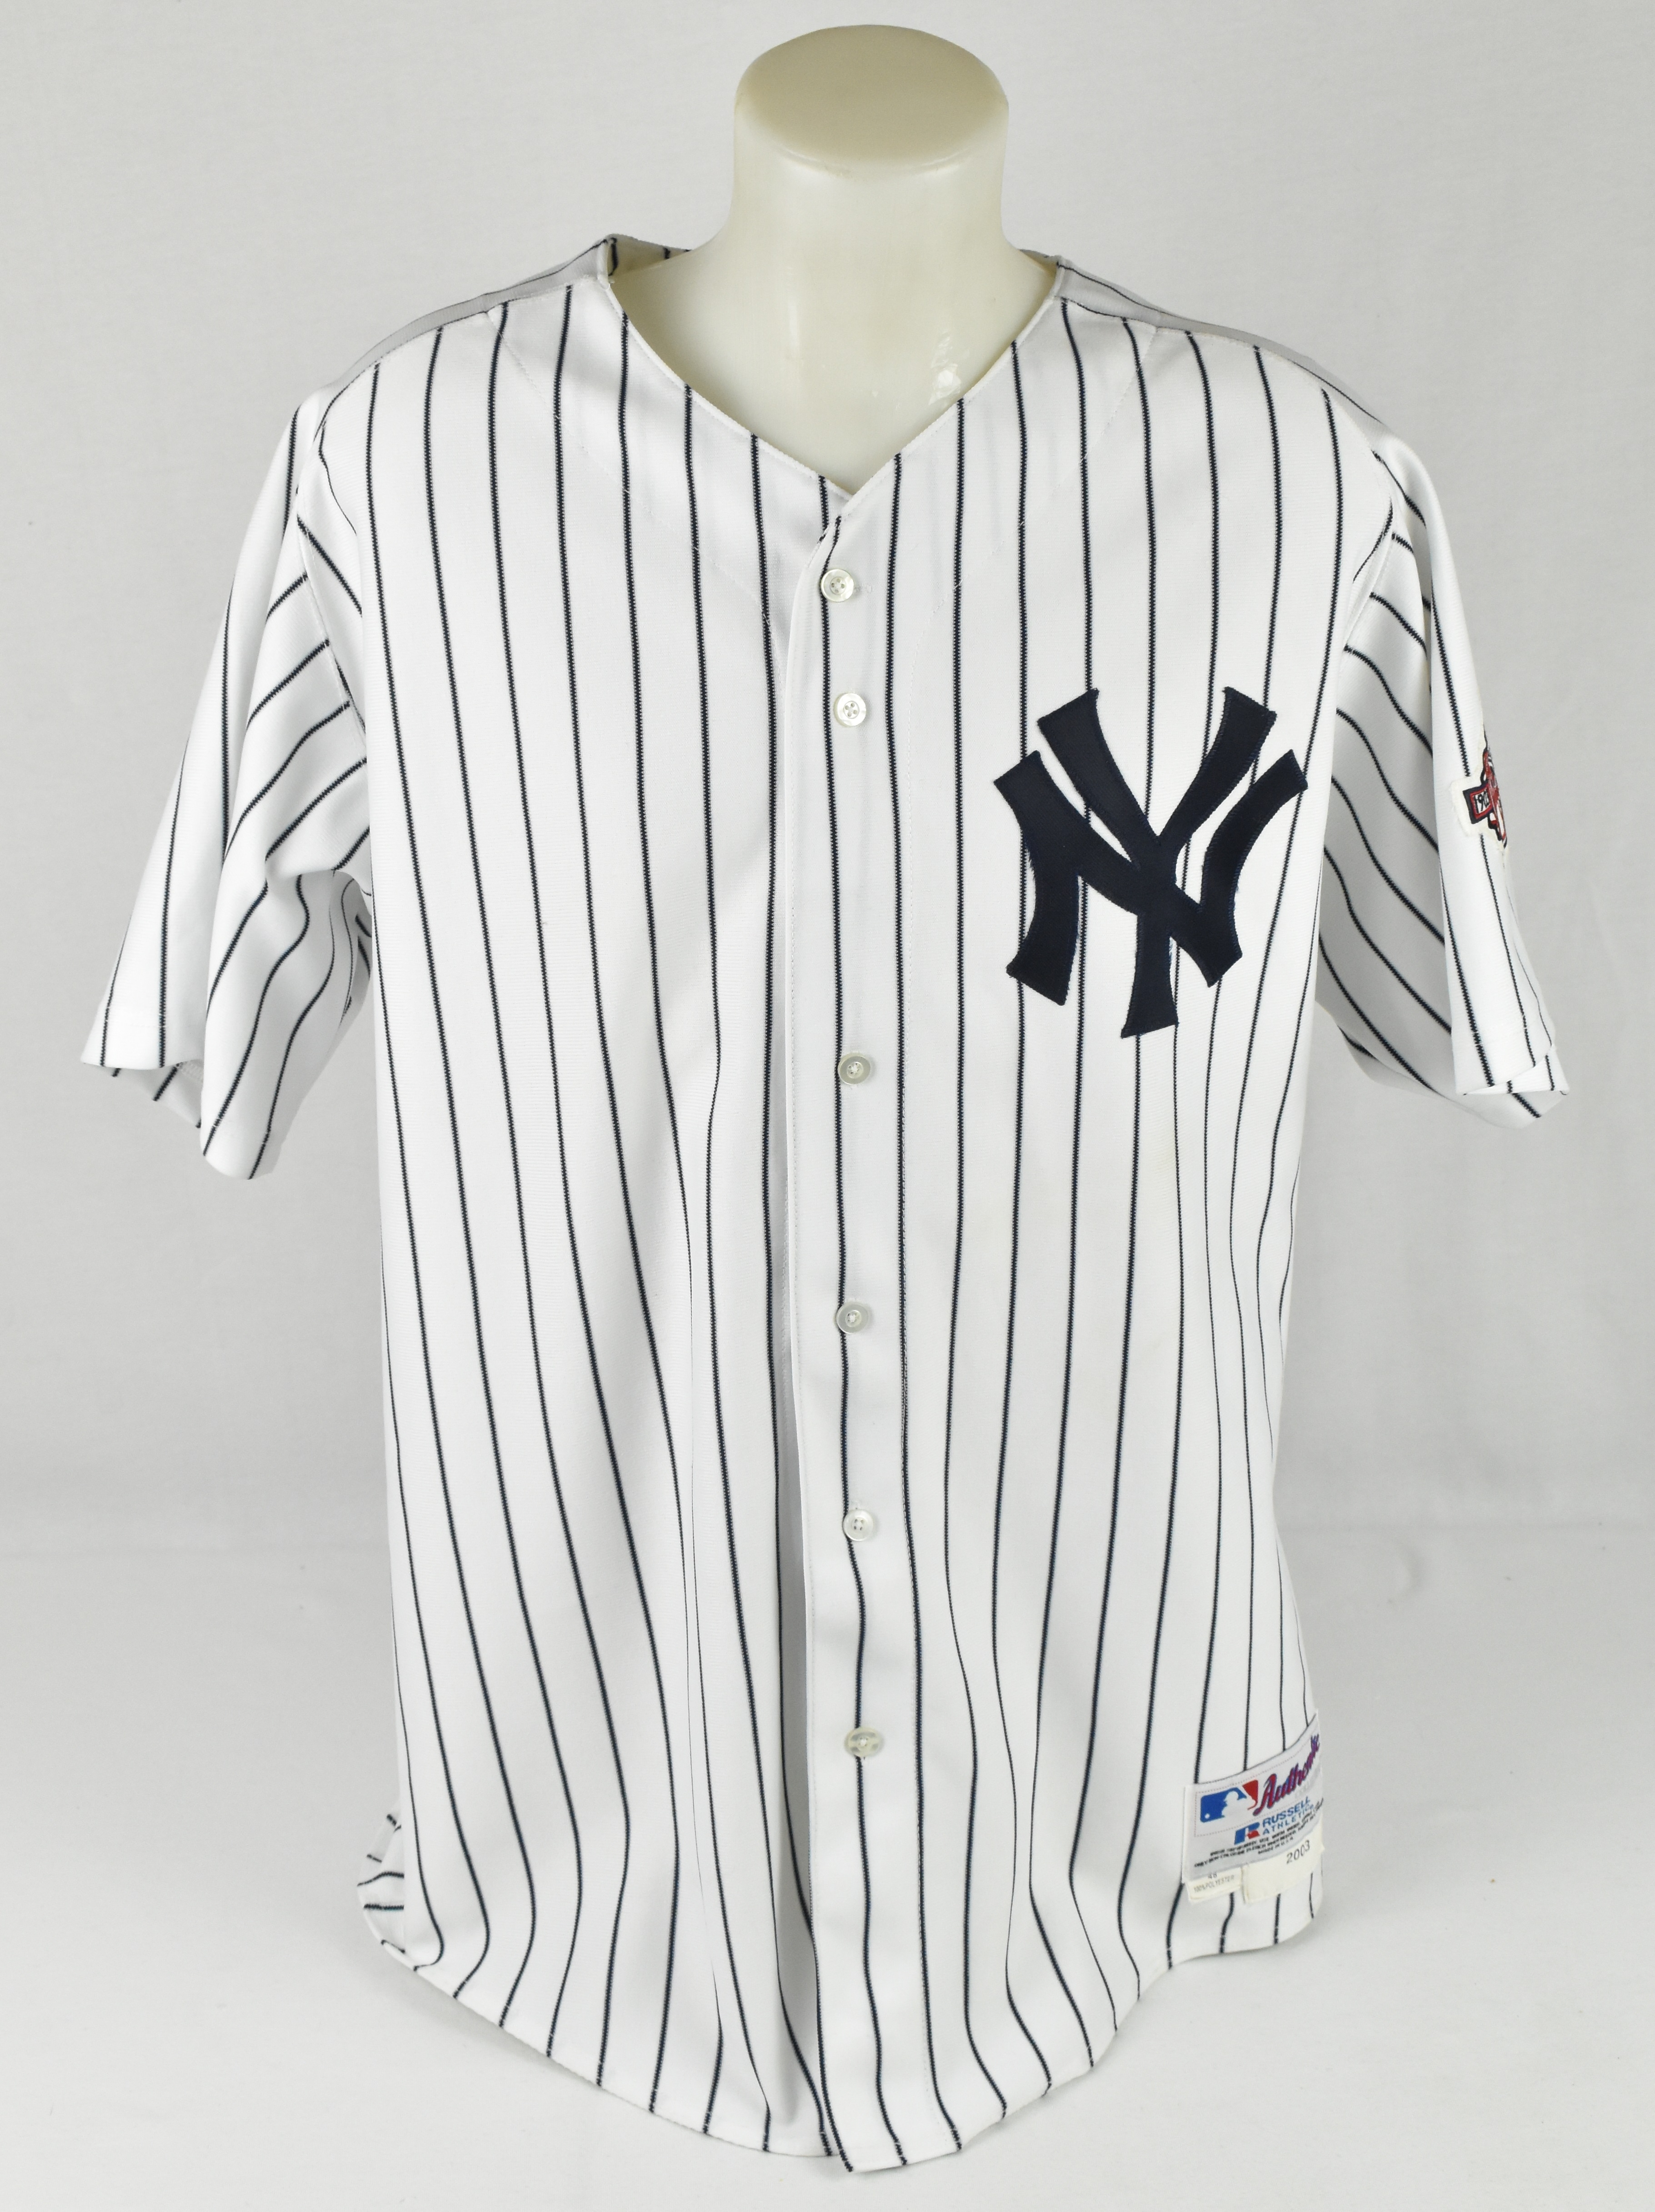 Derek Jeter's first-ever New York Yankees jersey up for auction